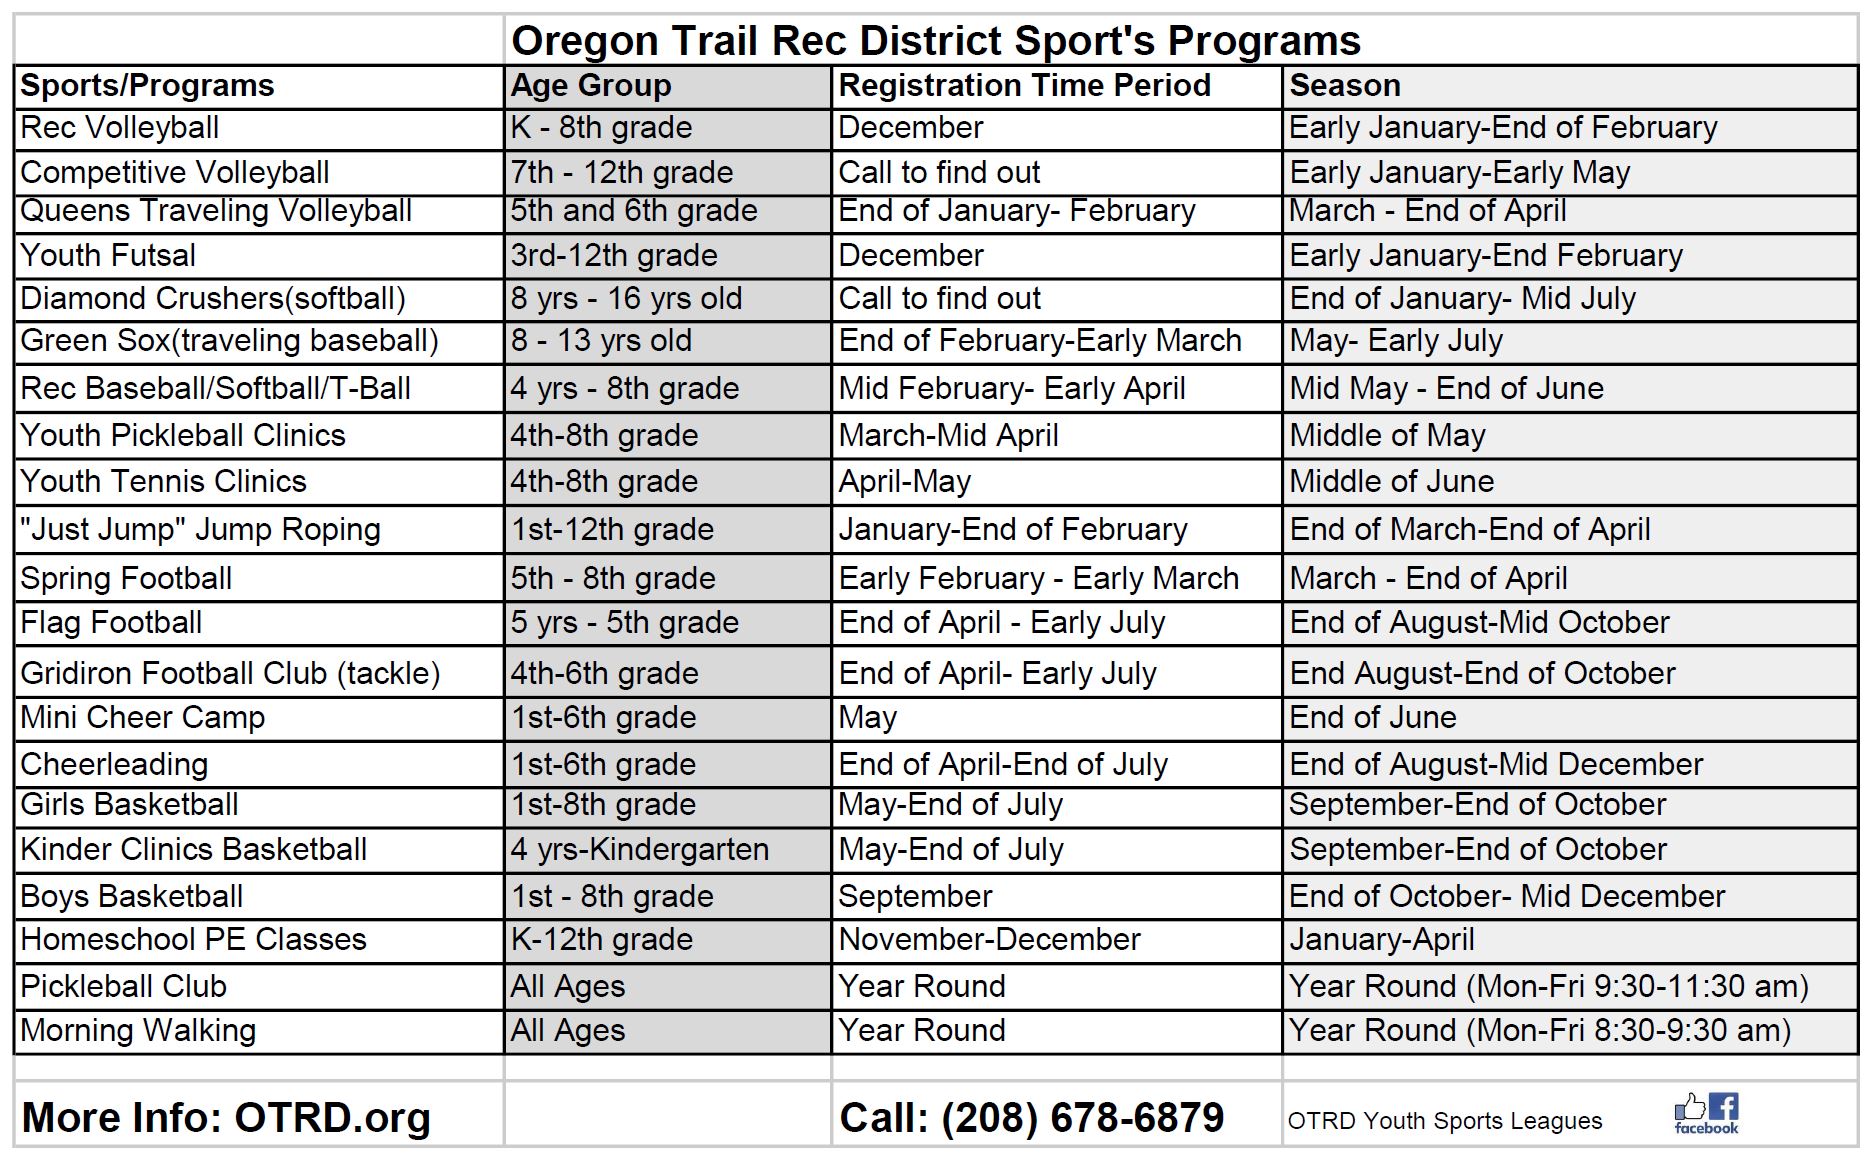 Programs Offered at the Oregon Trail Recreation District